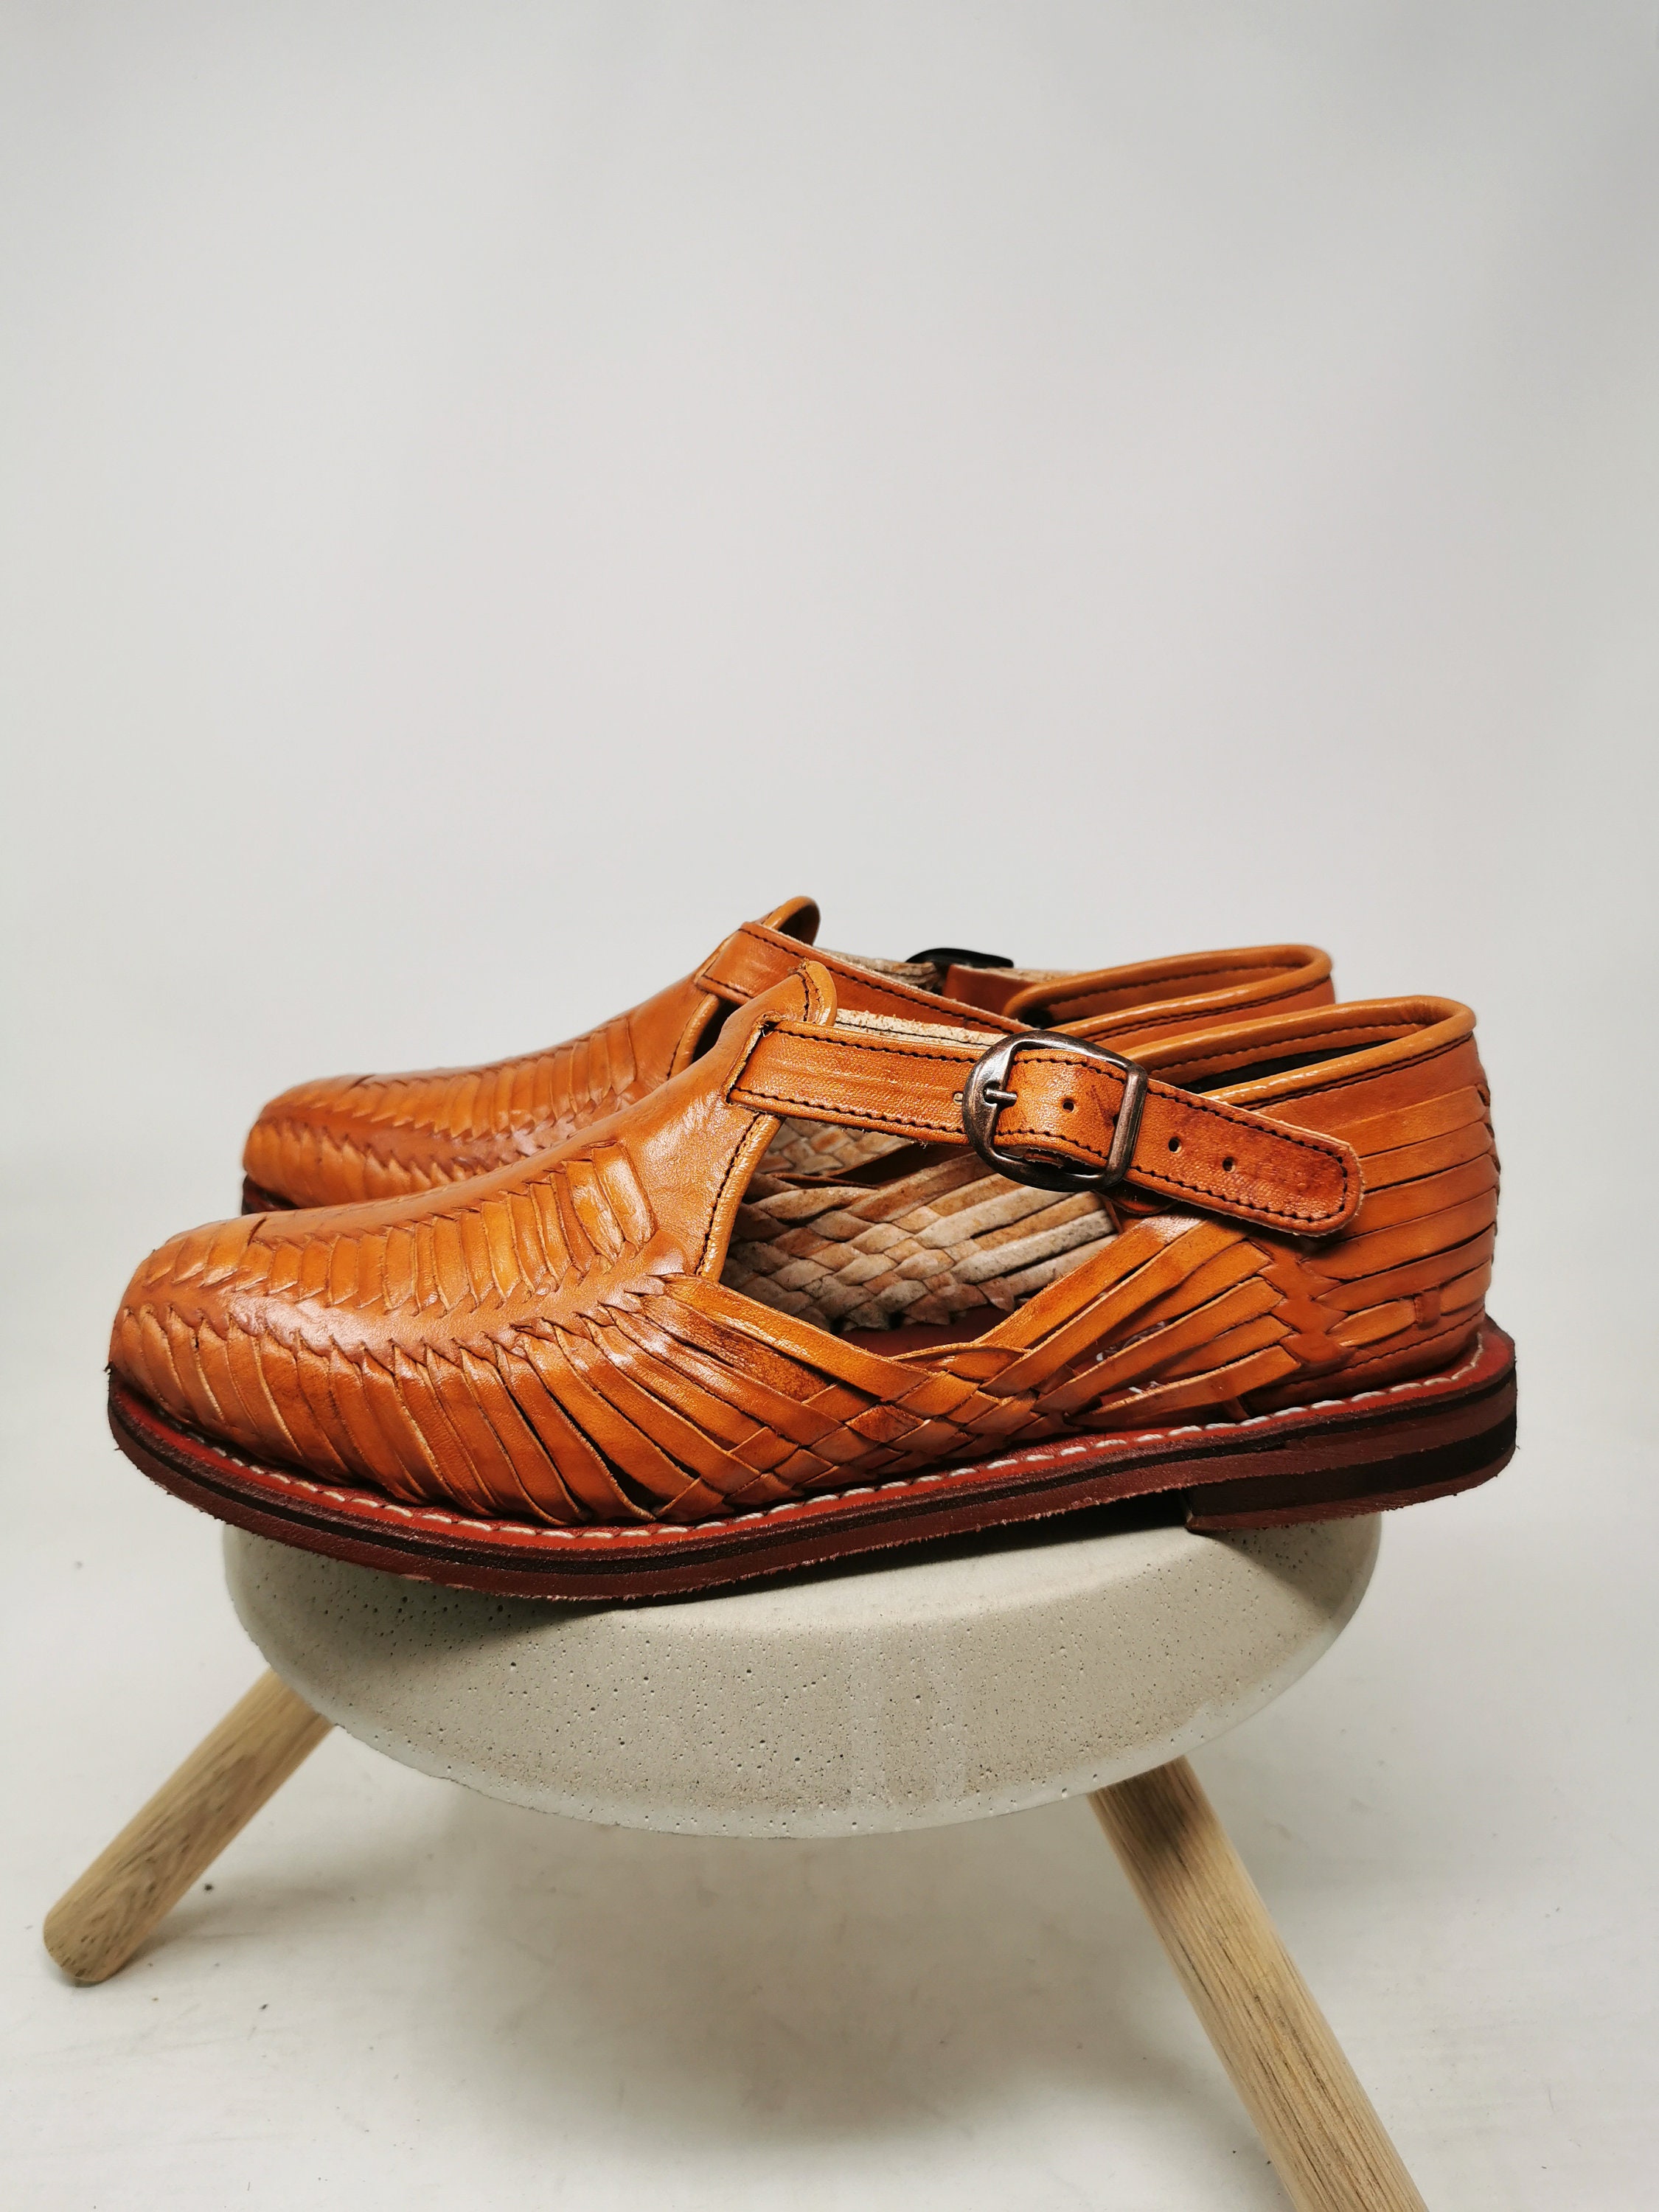 Mens Huaraches With Strap Closed Toe Sandals. Made in Mexico - Etsy